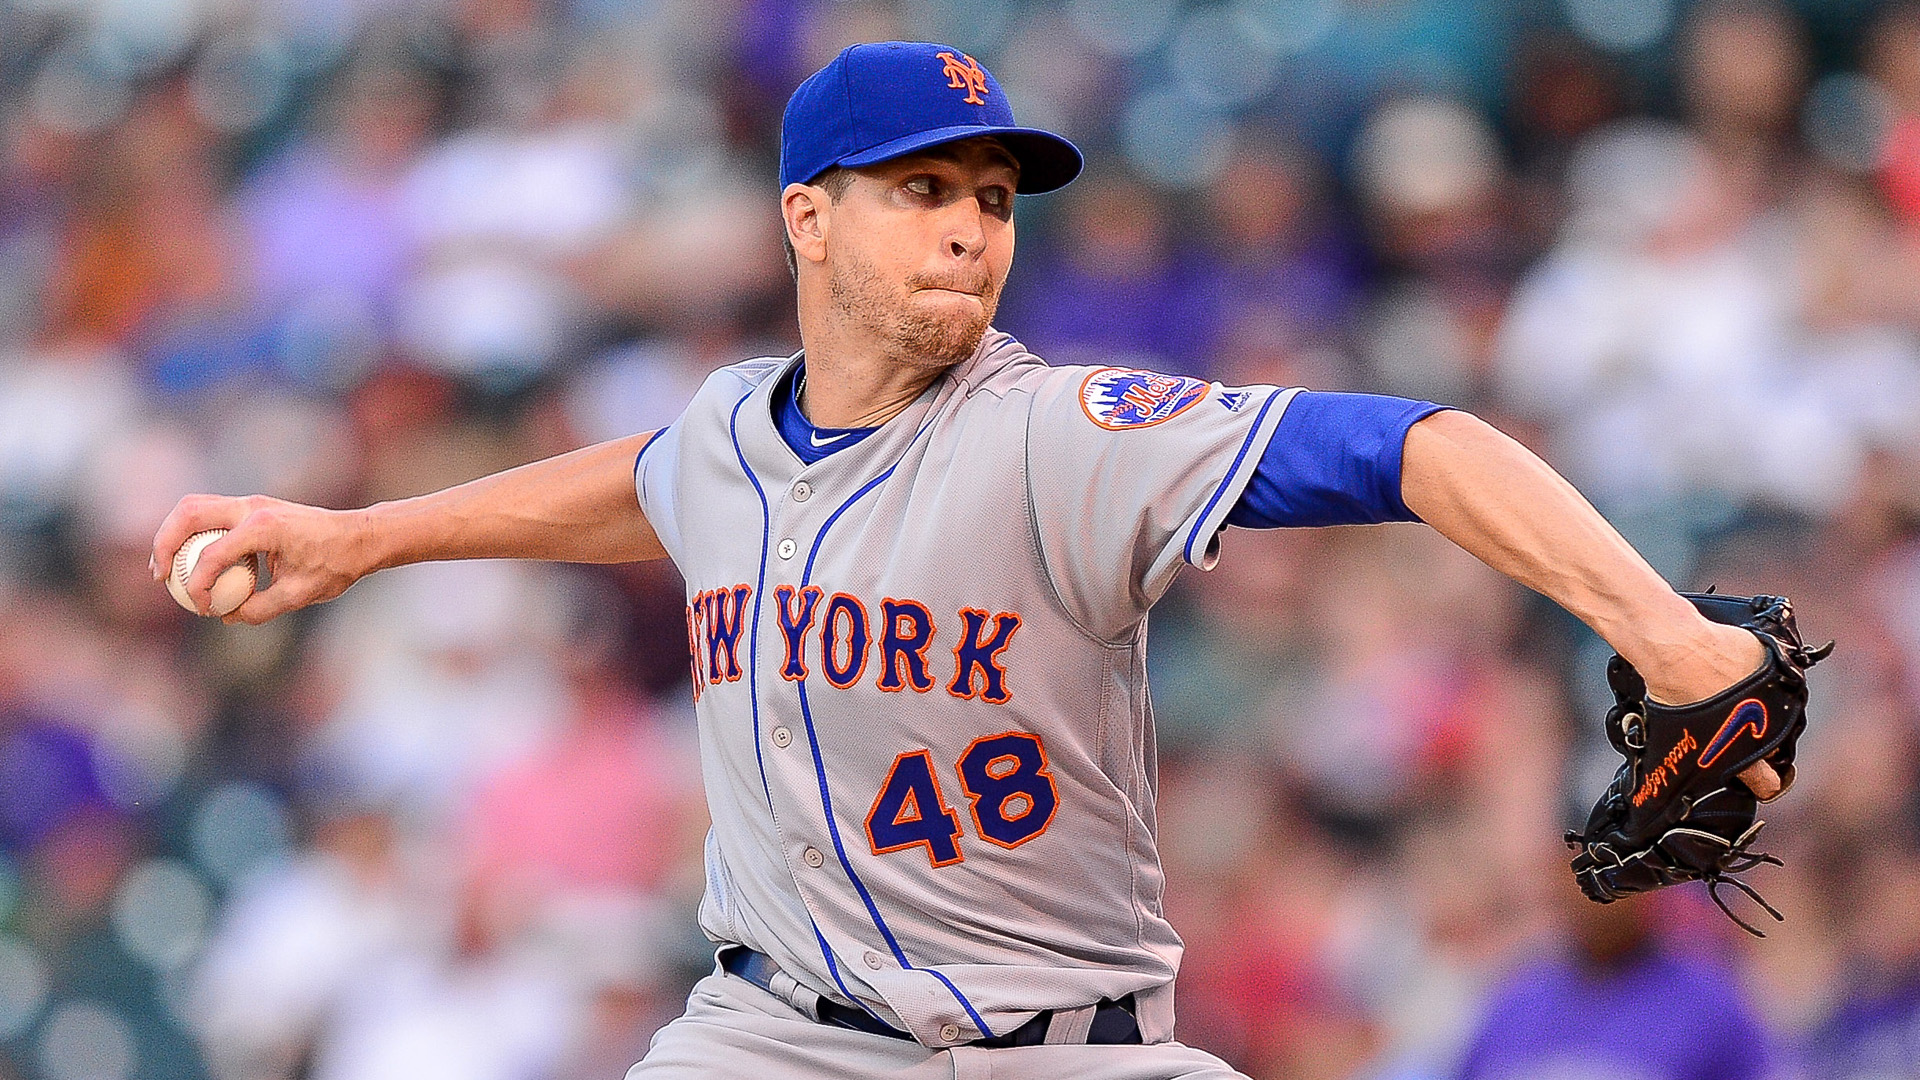 The Mets righty is confident he will be ready to return once his injured list stint ends Friday.